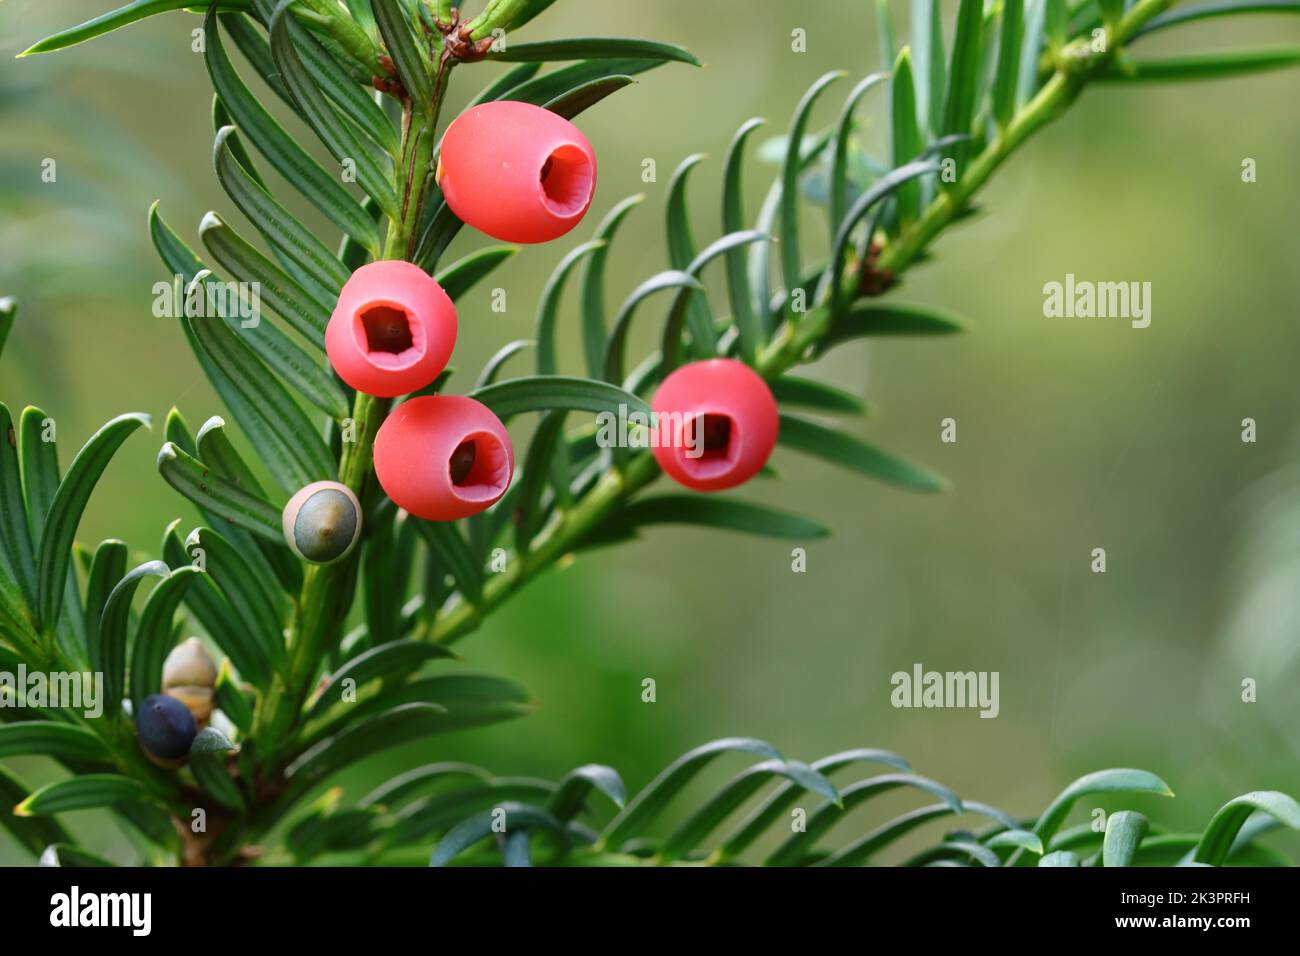 close-up of ripened red seeds on a branch of the European yew (taxus baccata) against a green blurry background Stock Photo